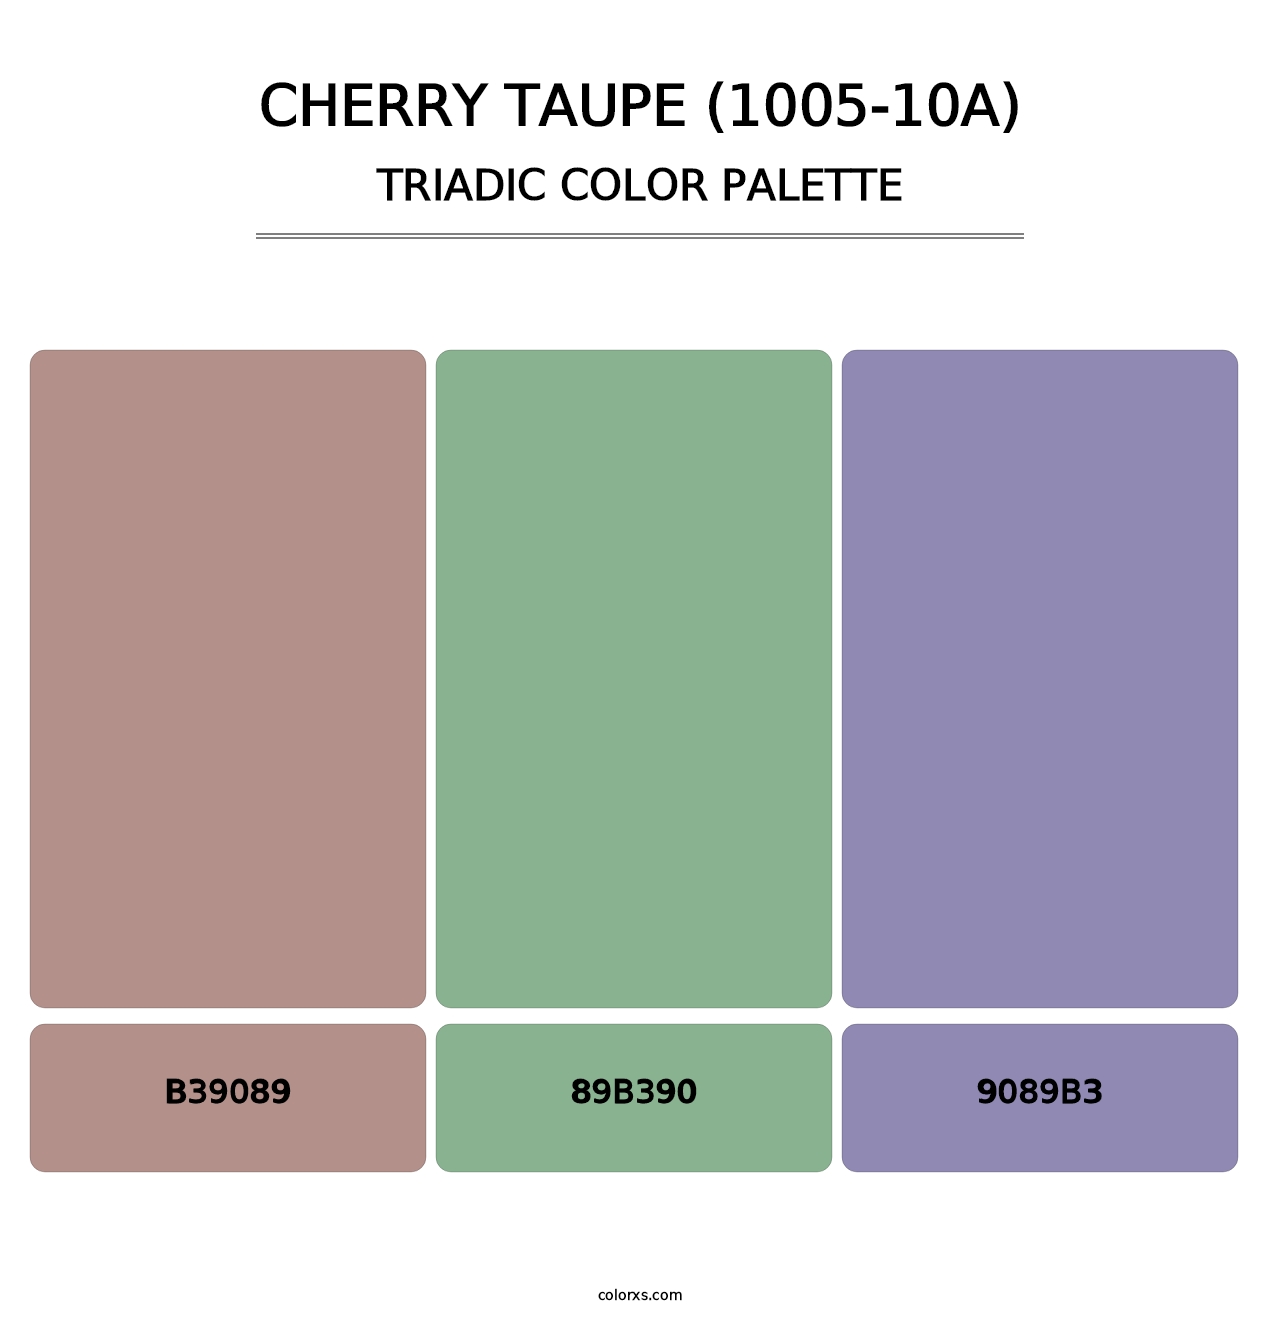 Cherry Taupe (1005-10A) - Triadic Color Palette